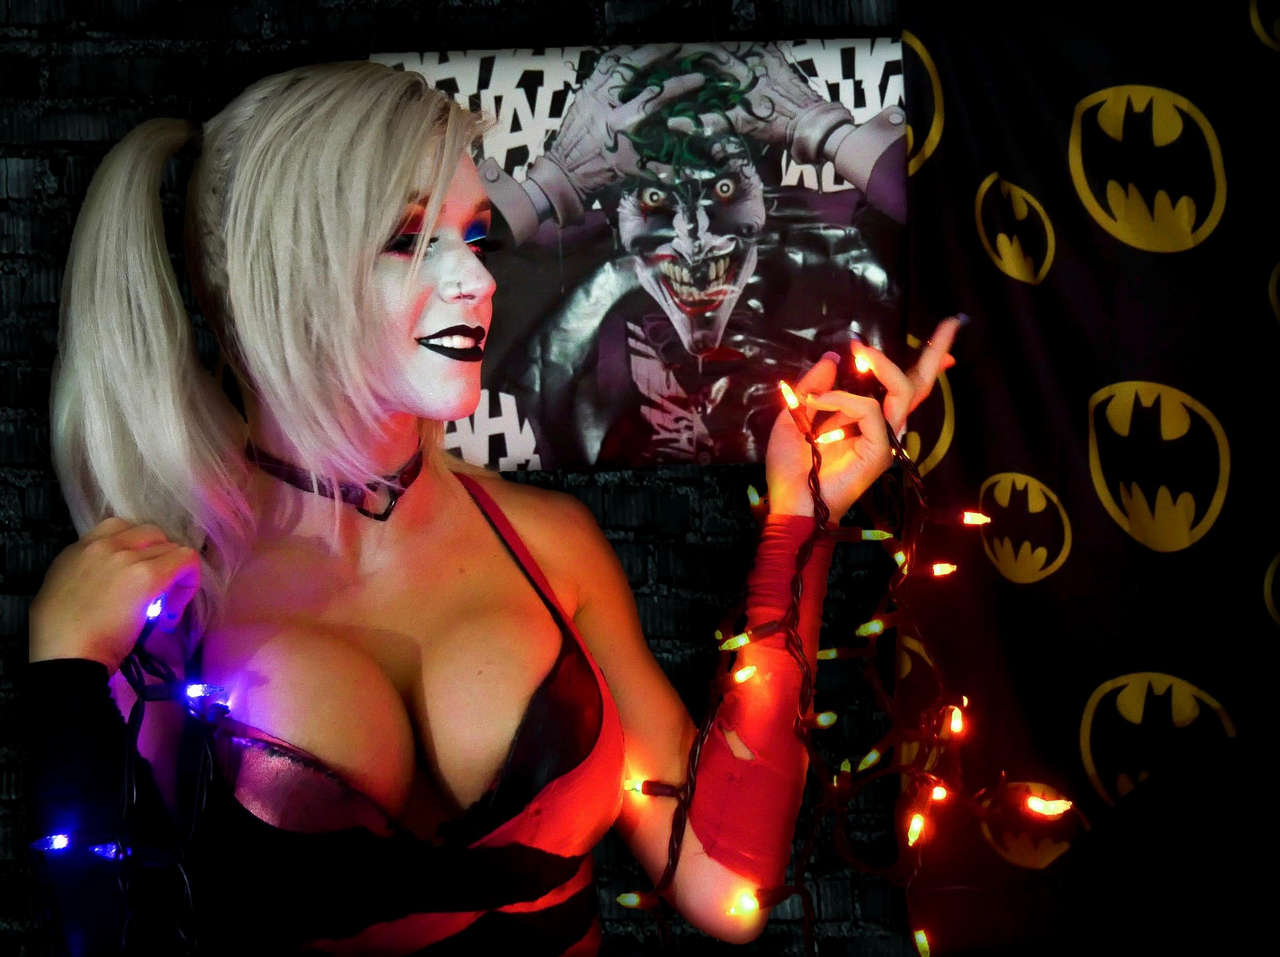 Harley Quinn By Abbeydawncosplay Give Her A Follow She Has Some Awesome Conten